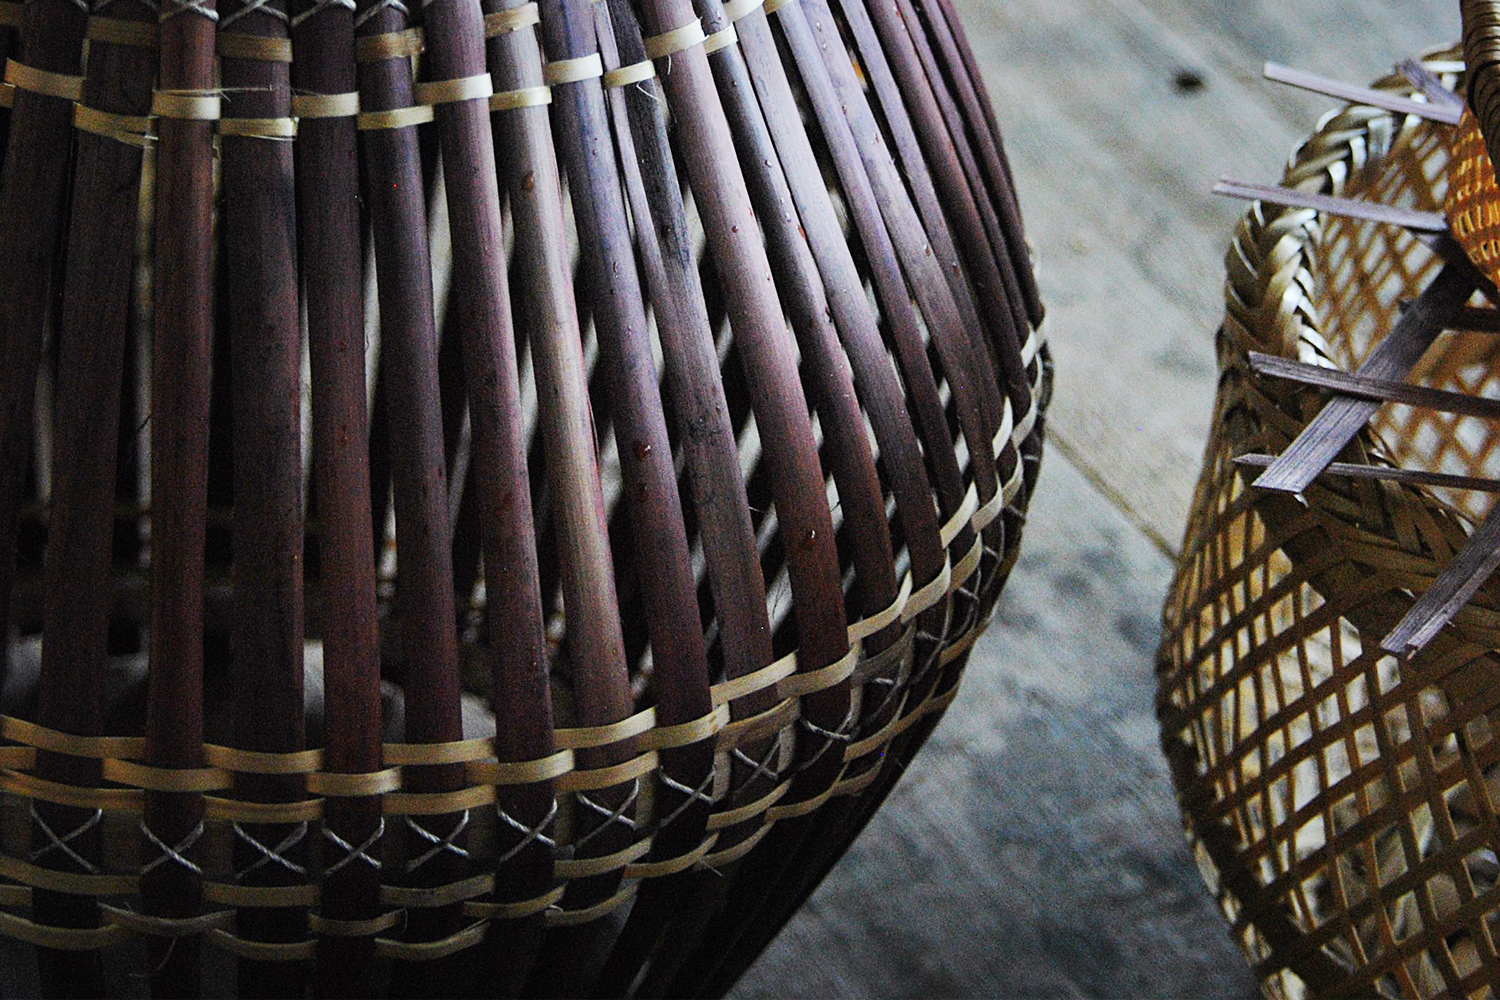 Examples of different types of bamboo weave